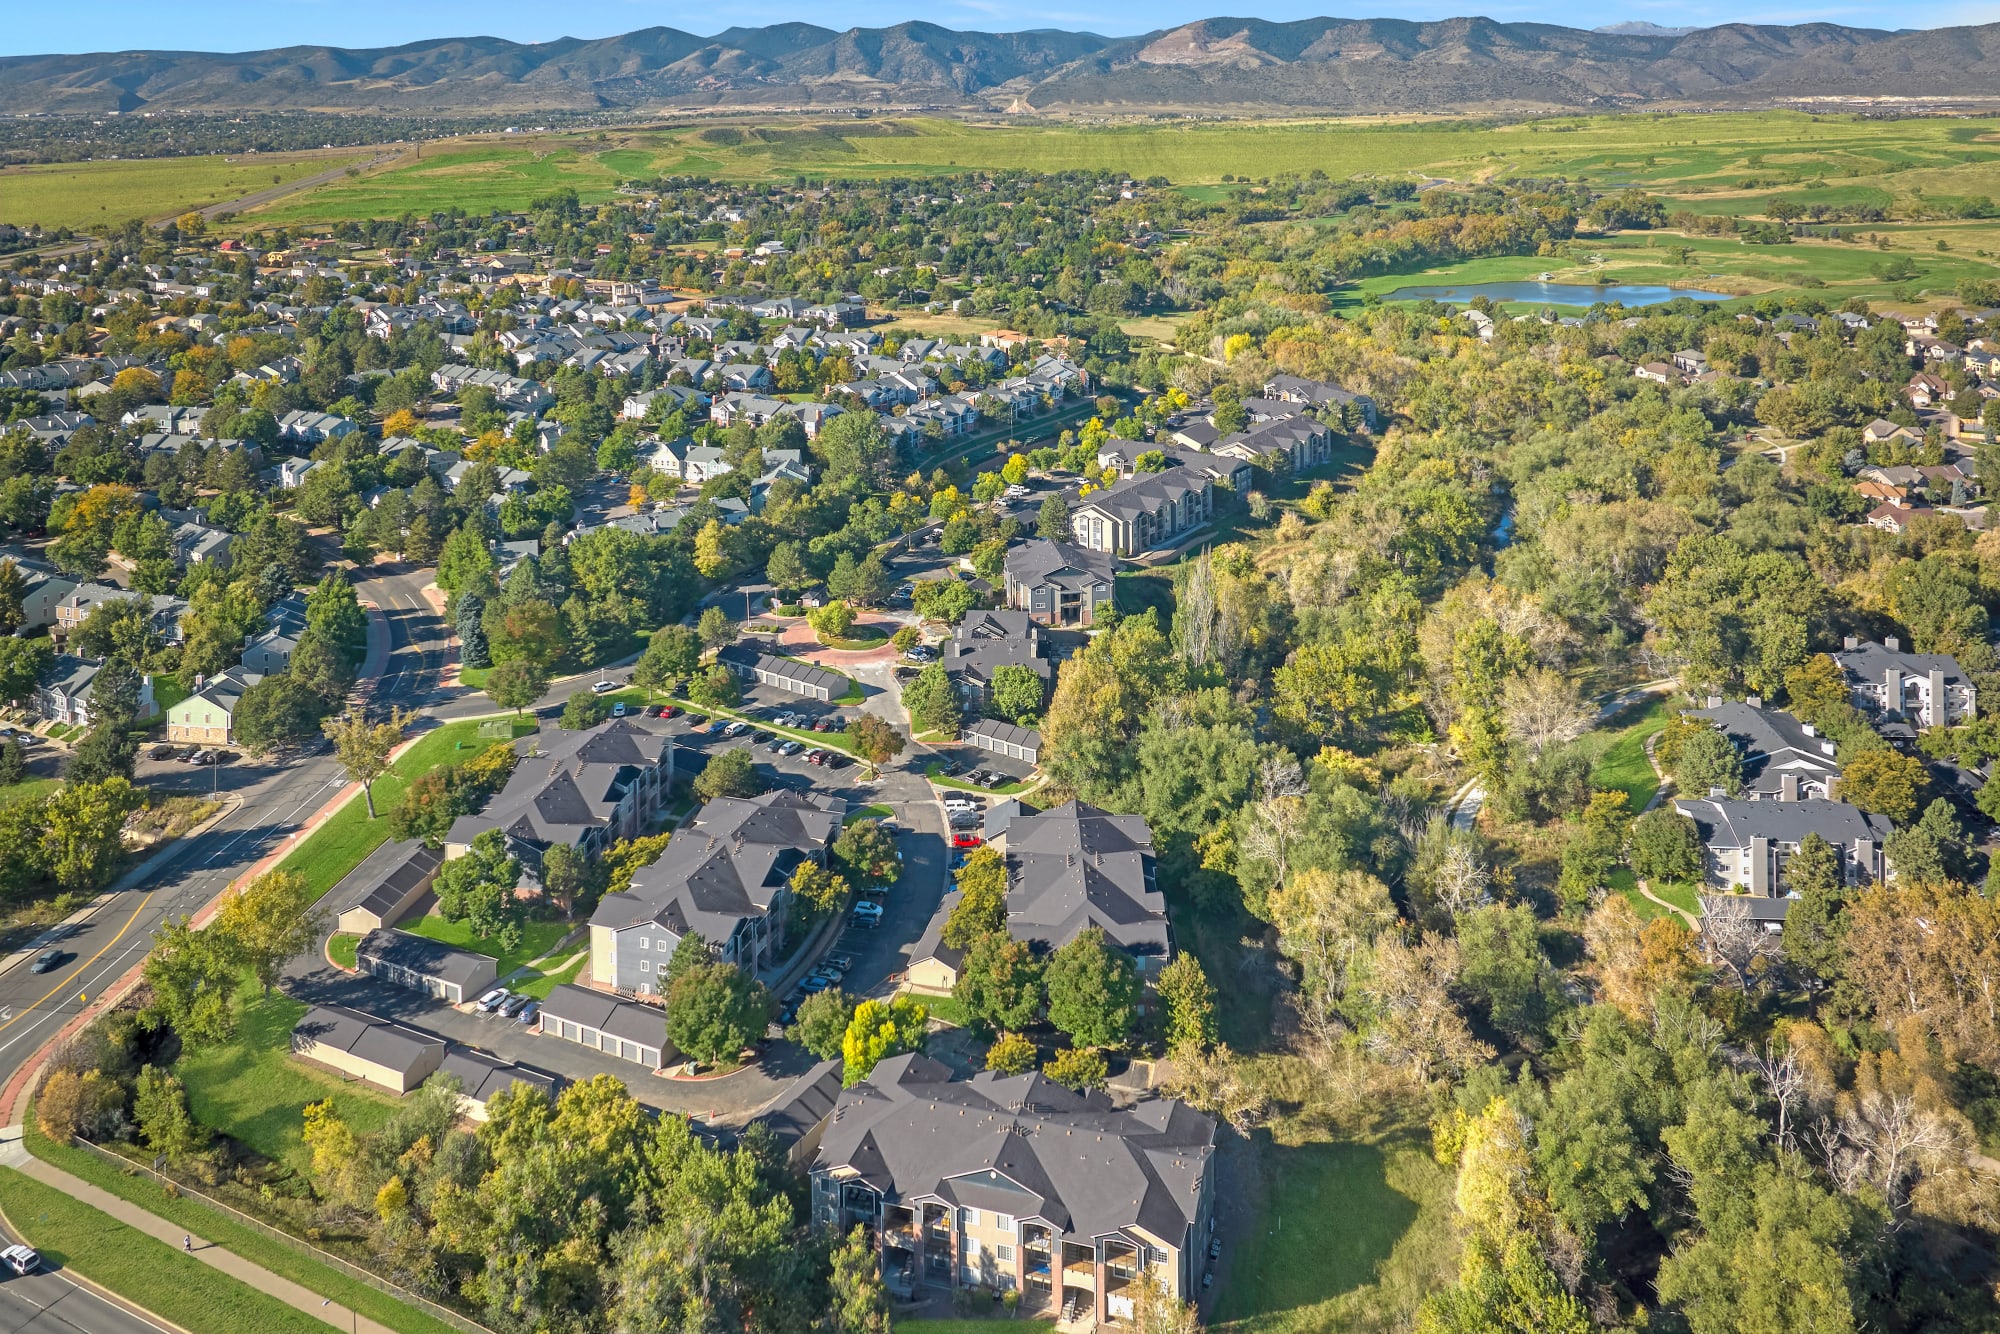 An aerial view of the property and surrounding areas at The Crossings at Bear Creek Apartments in Lakewood, Colorado